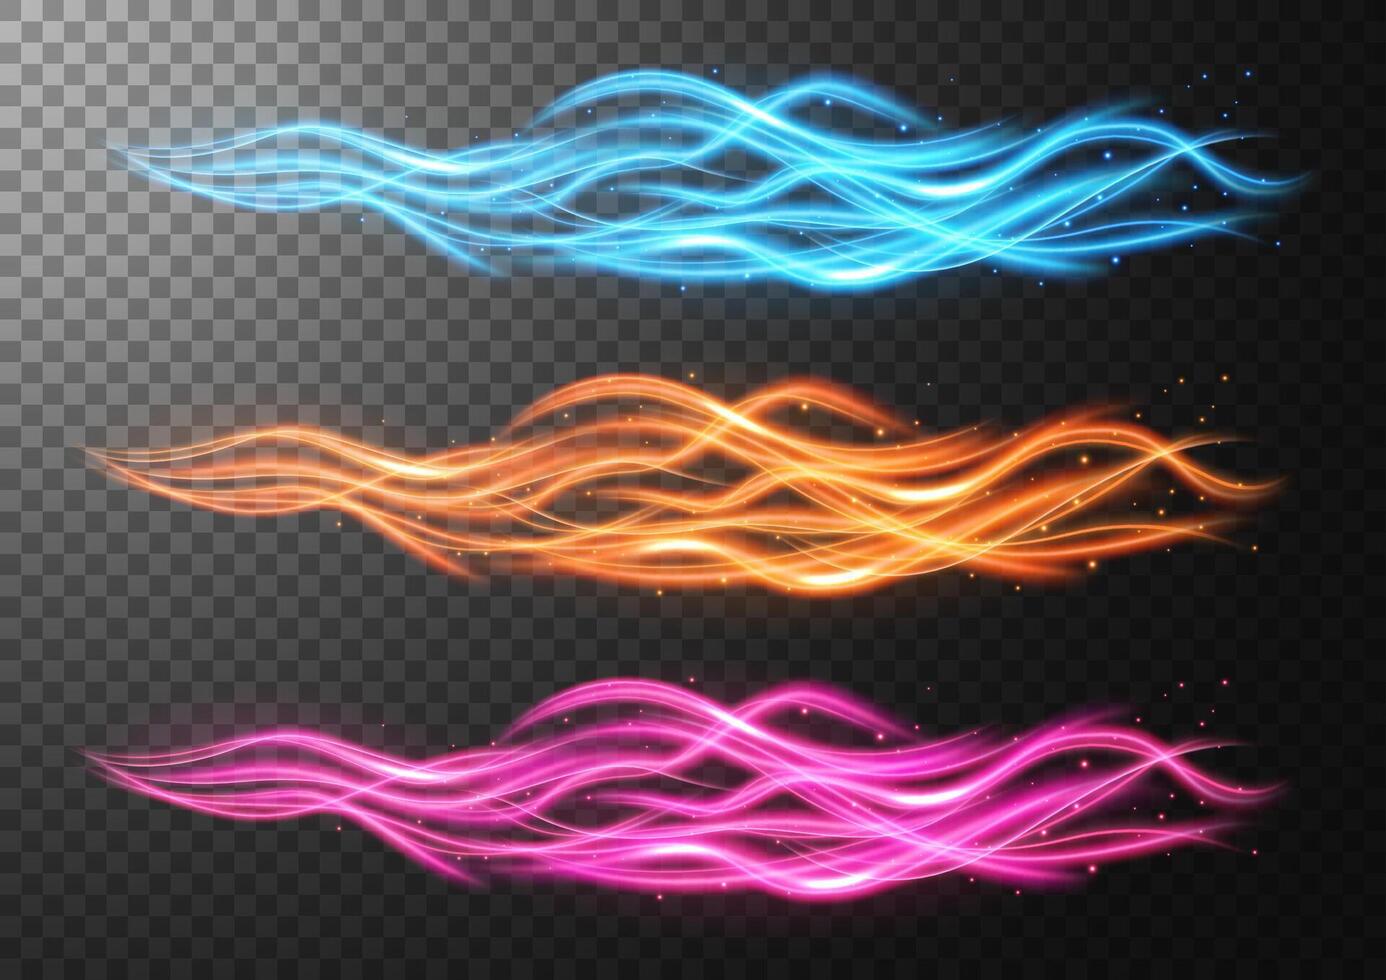 Abstract Wavy Line of Light Set with A Background, Isolated and Easy to Edit, Vector Illustration